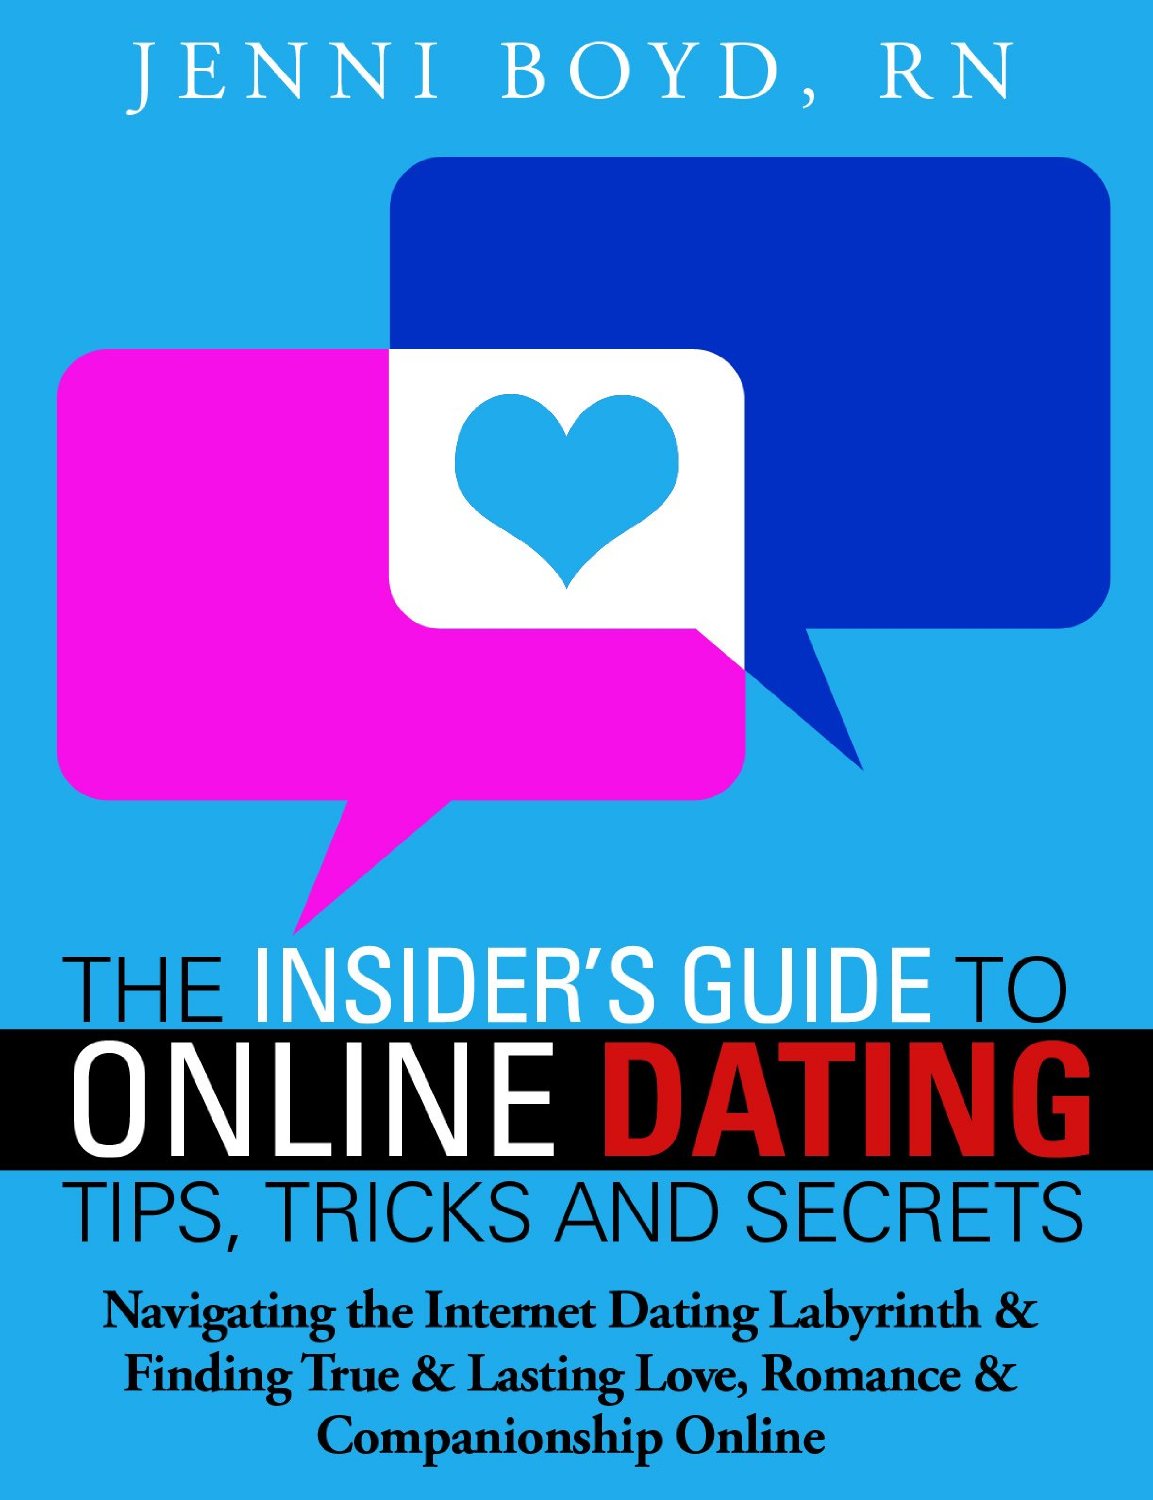 The Insider’s Guide to Online Dating Tips, Tricks and Secrets by Jenni Boyd